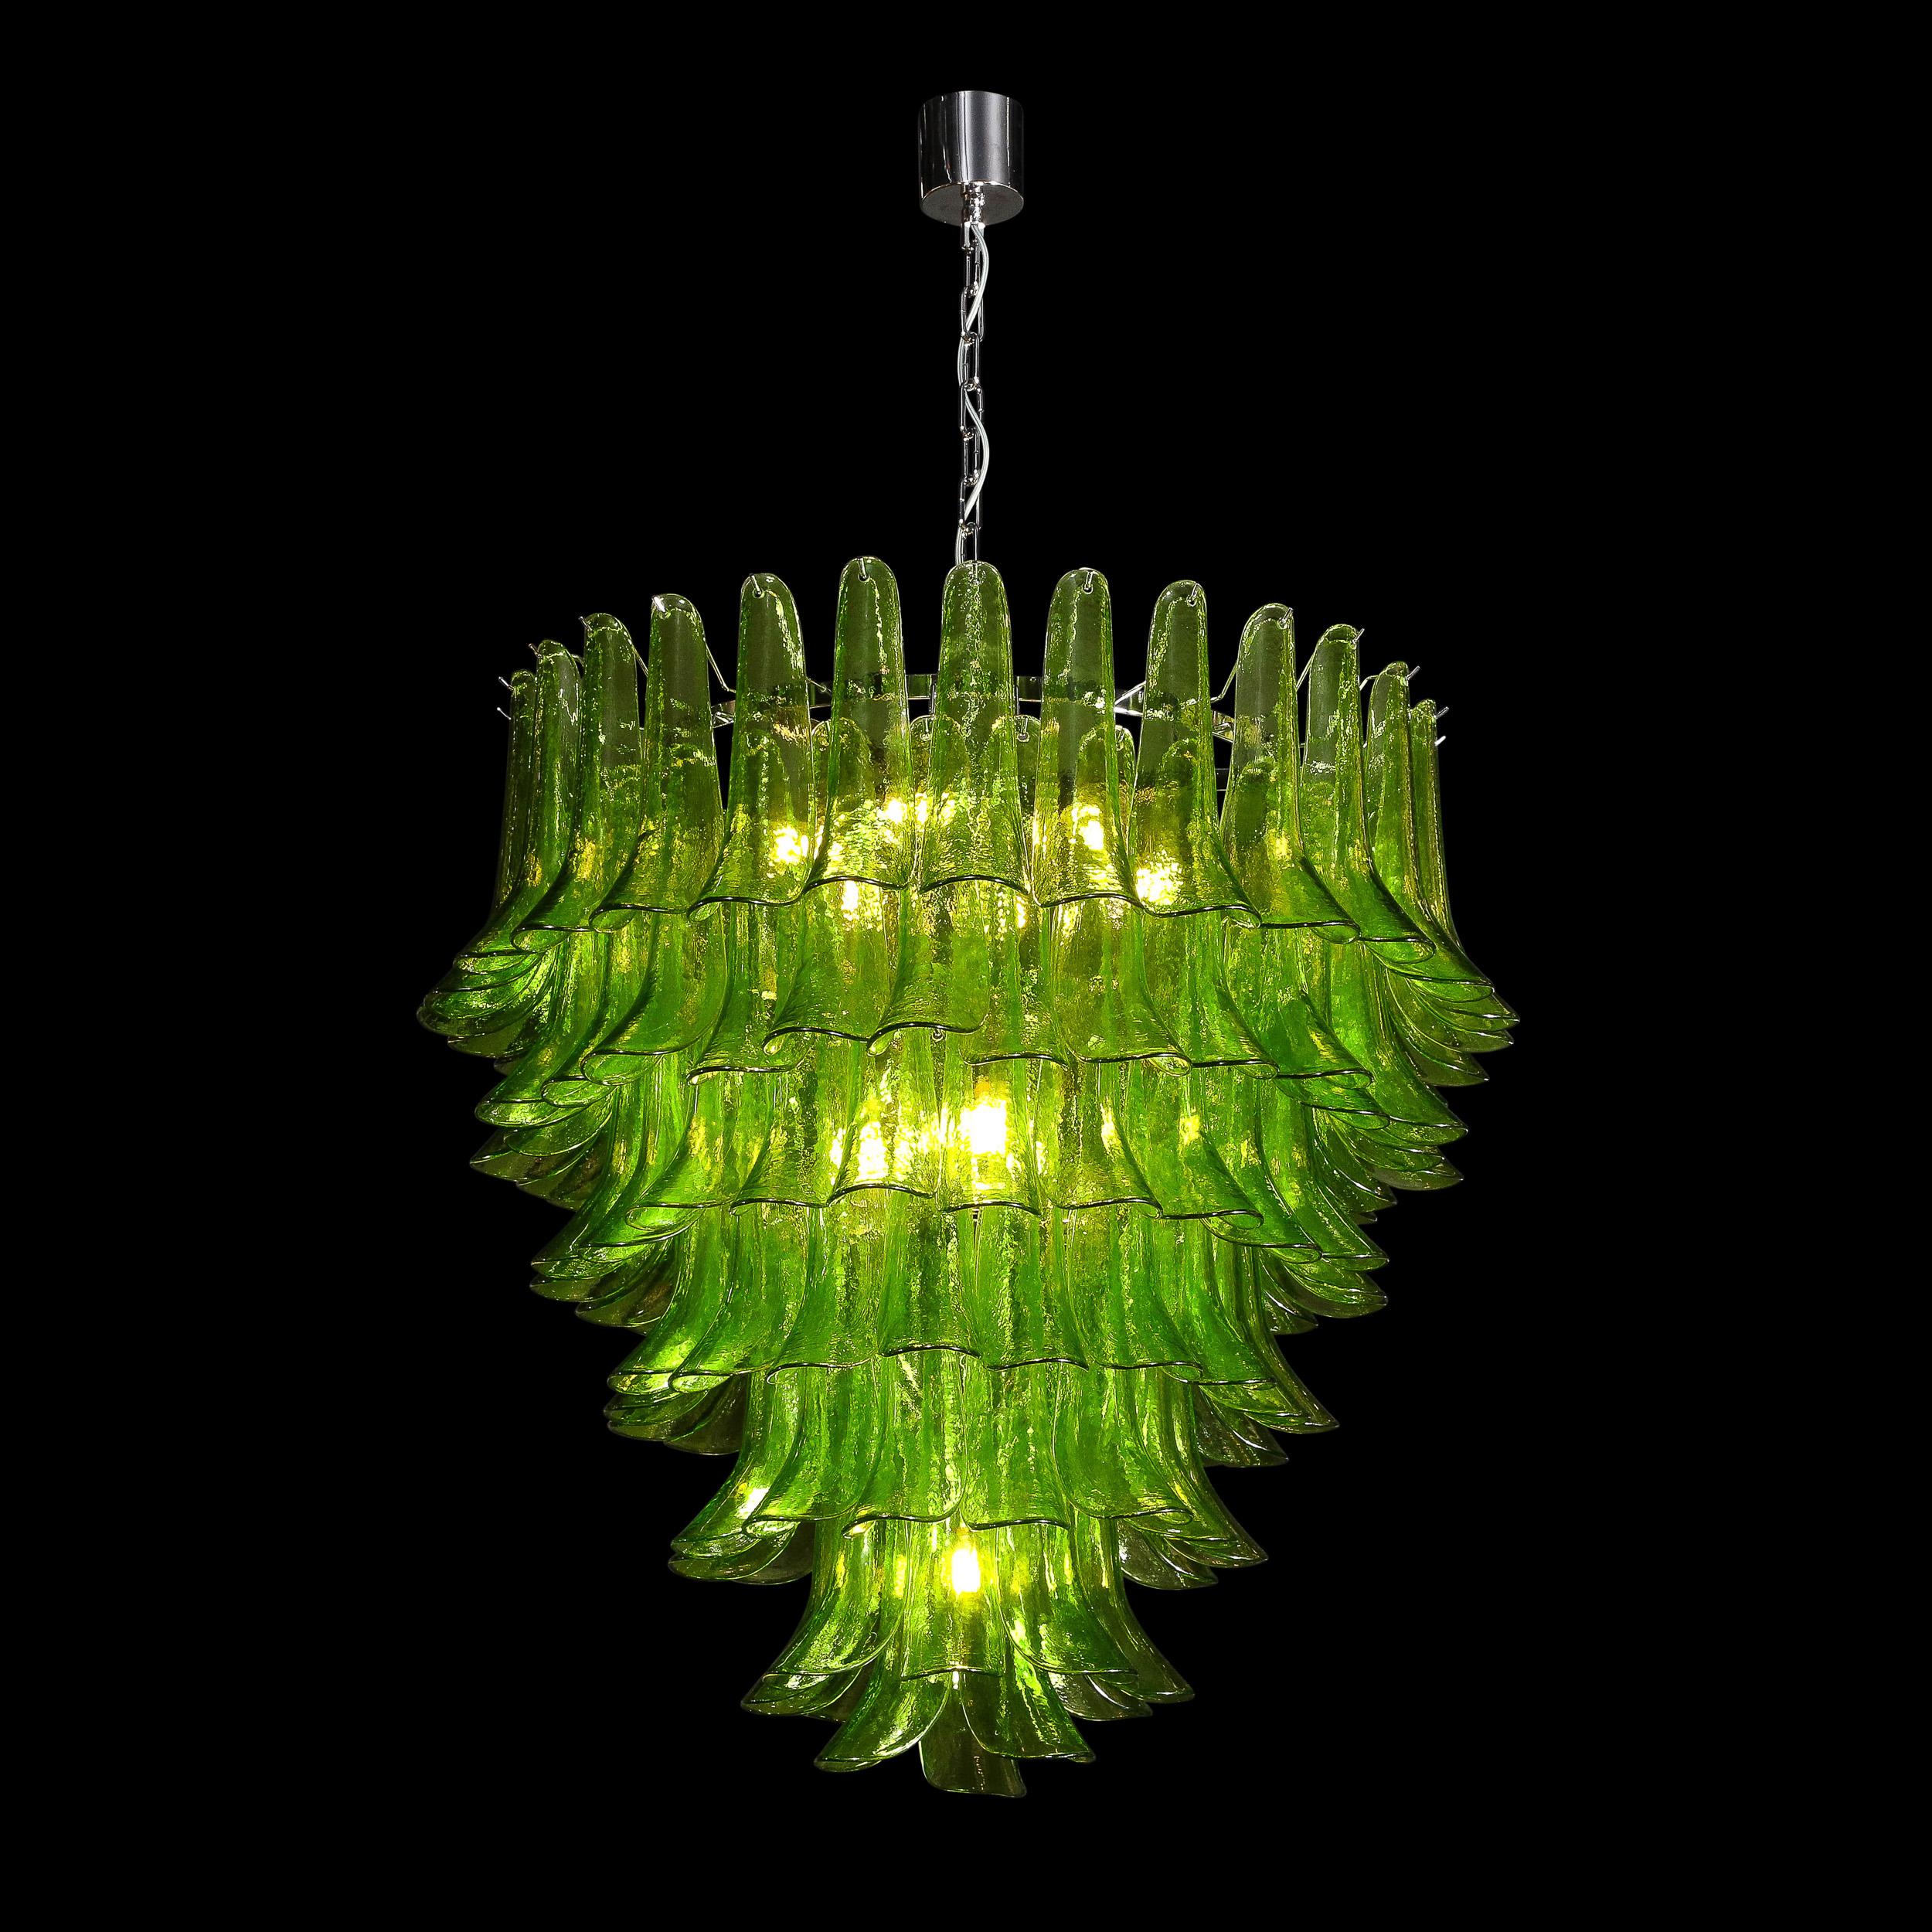 This modernist chandelier features seven tiers of cascading glass, hand-blown in Murano Italy in the 21st Century. The brilliant and powerful color density and hue, while maintaining translucence and consistent form gives each piece an unmatched